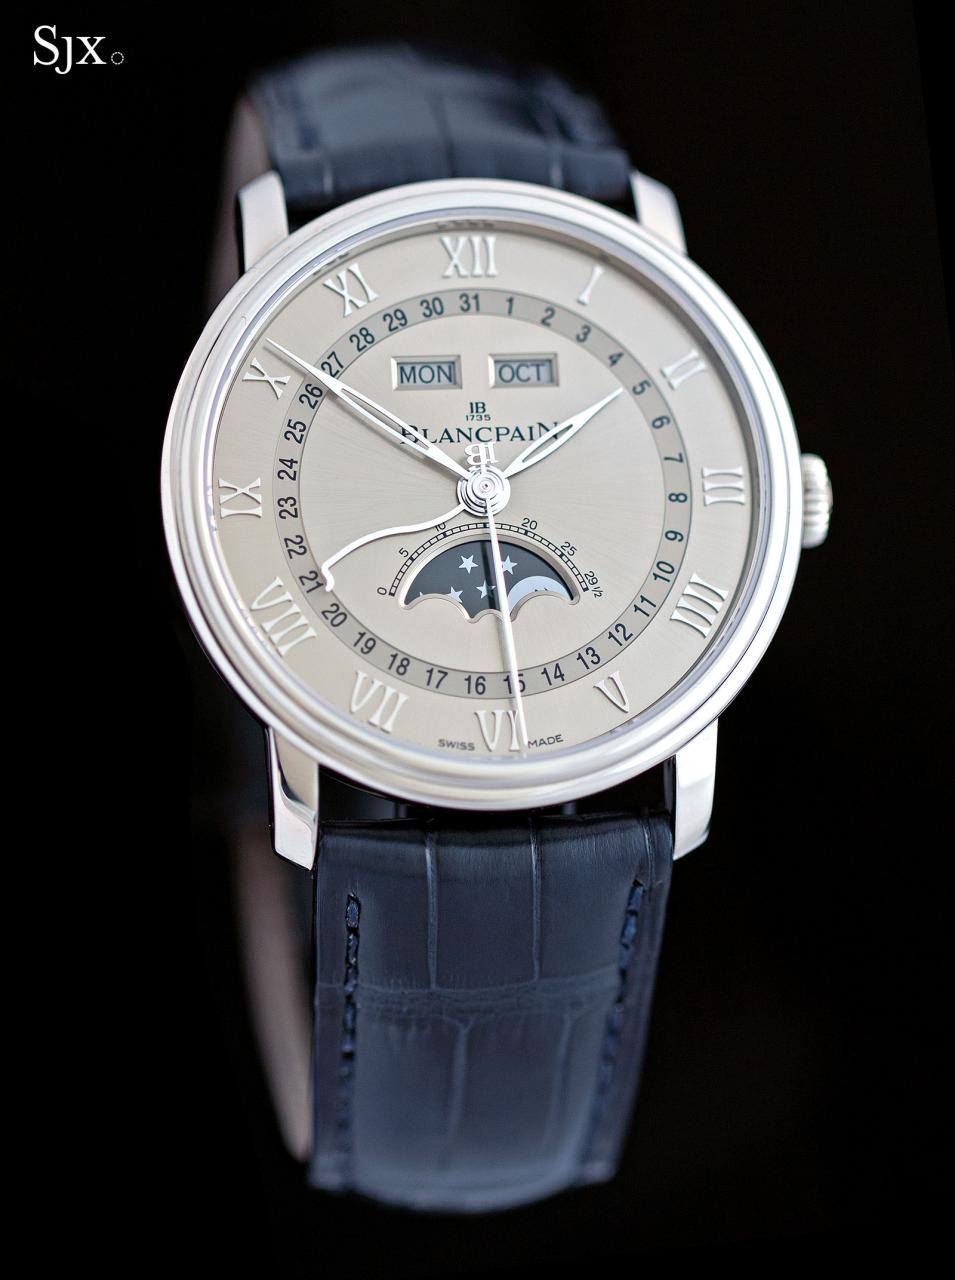 Discount Up Close with the Blancpain Villeret Entire Calendar 40mm Swiss Movement Replica Watches